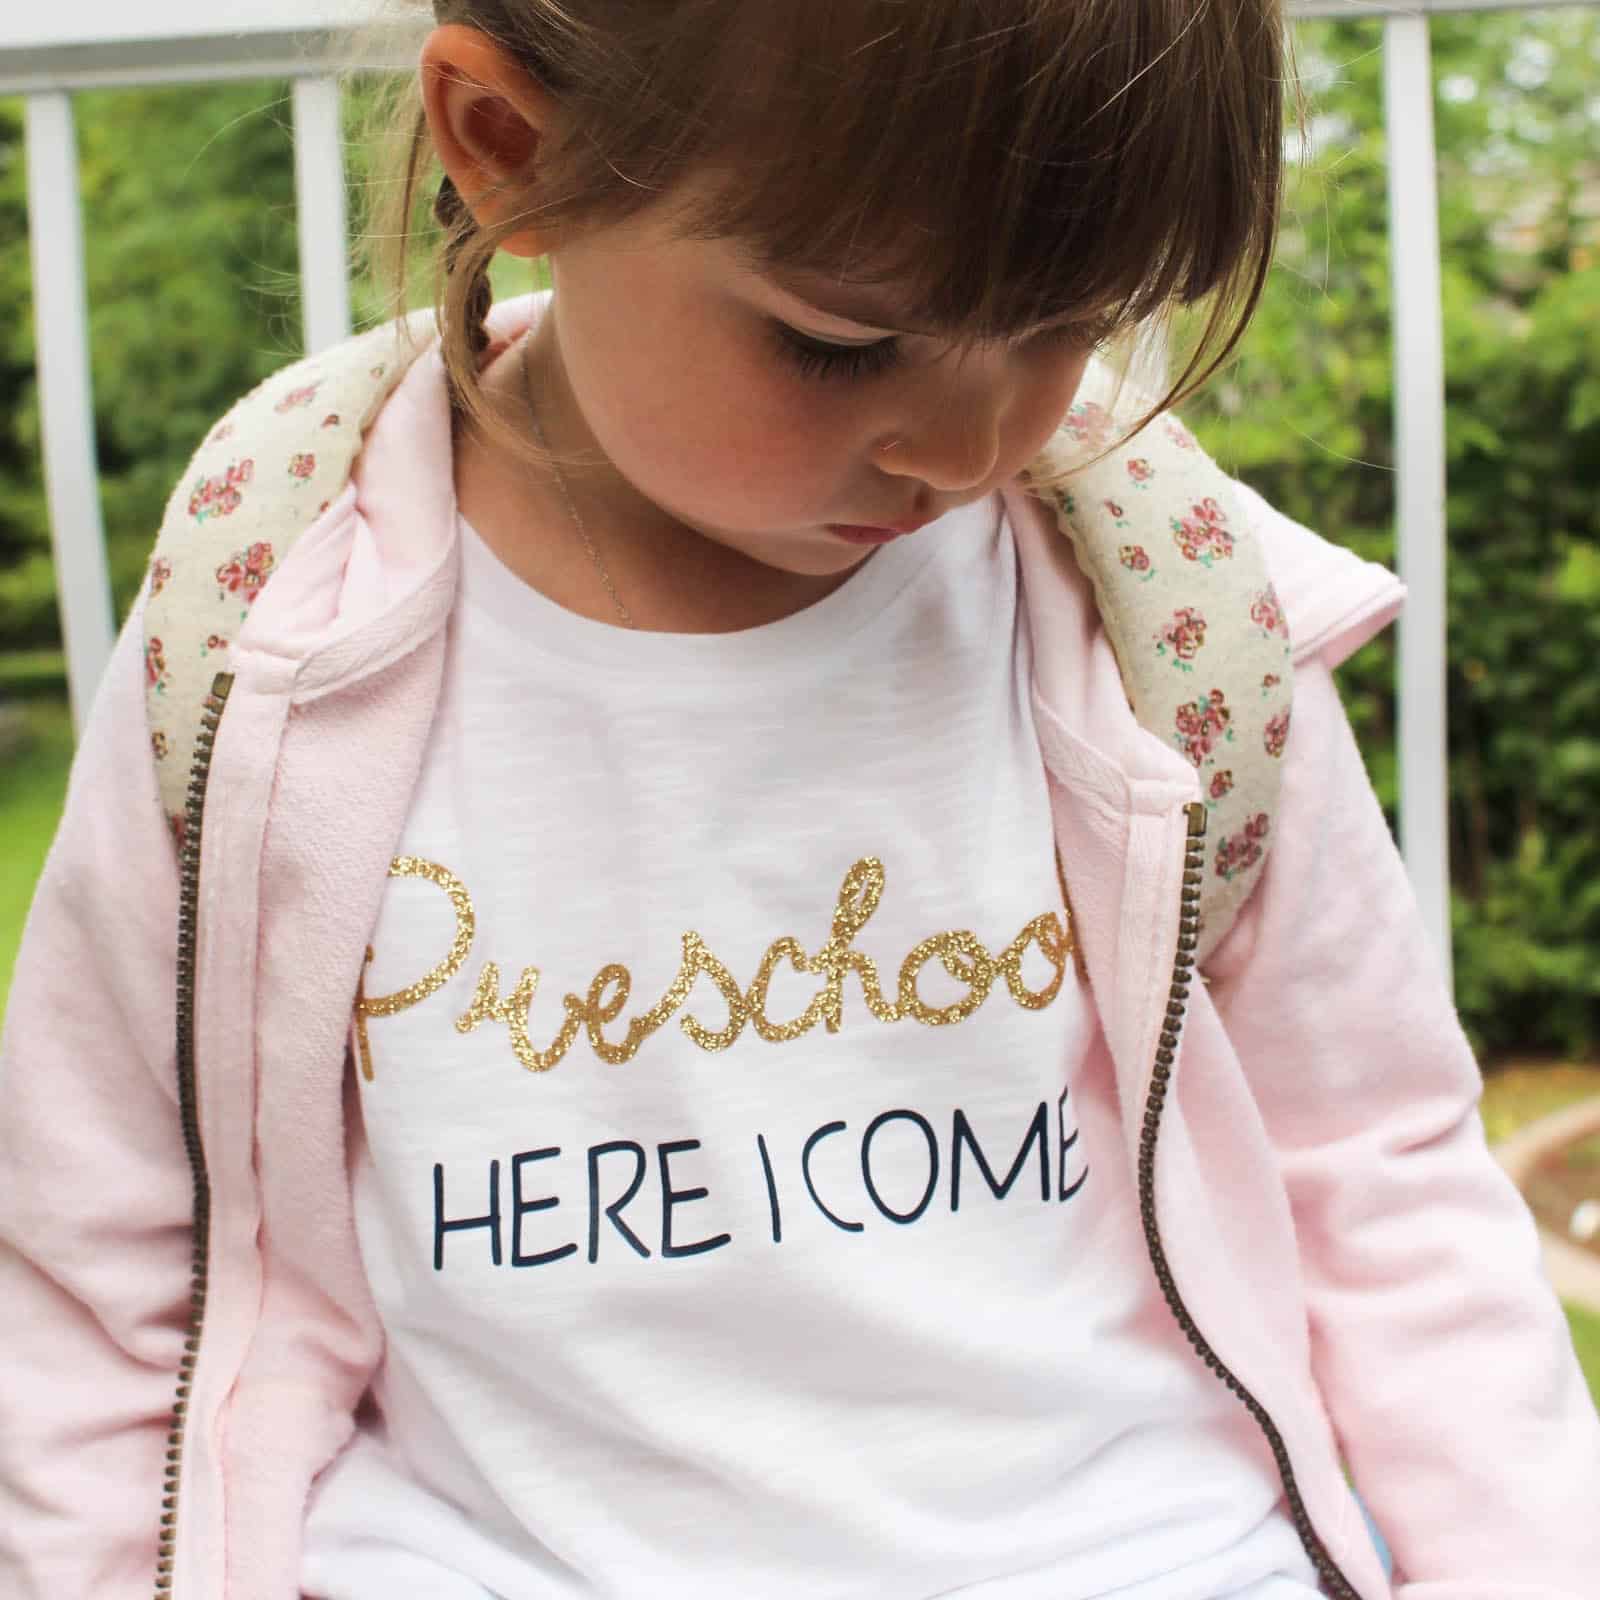 Get excited for the first day of preschool or kindergarten at school with a new custom t-shirt! This quick shirt was made with the Cricut Explore in just a few minutes! We are more than ready to start school now!